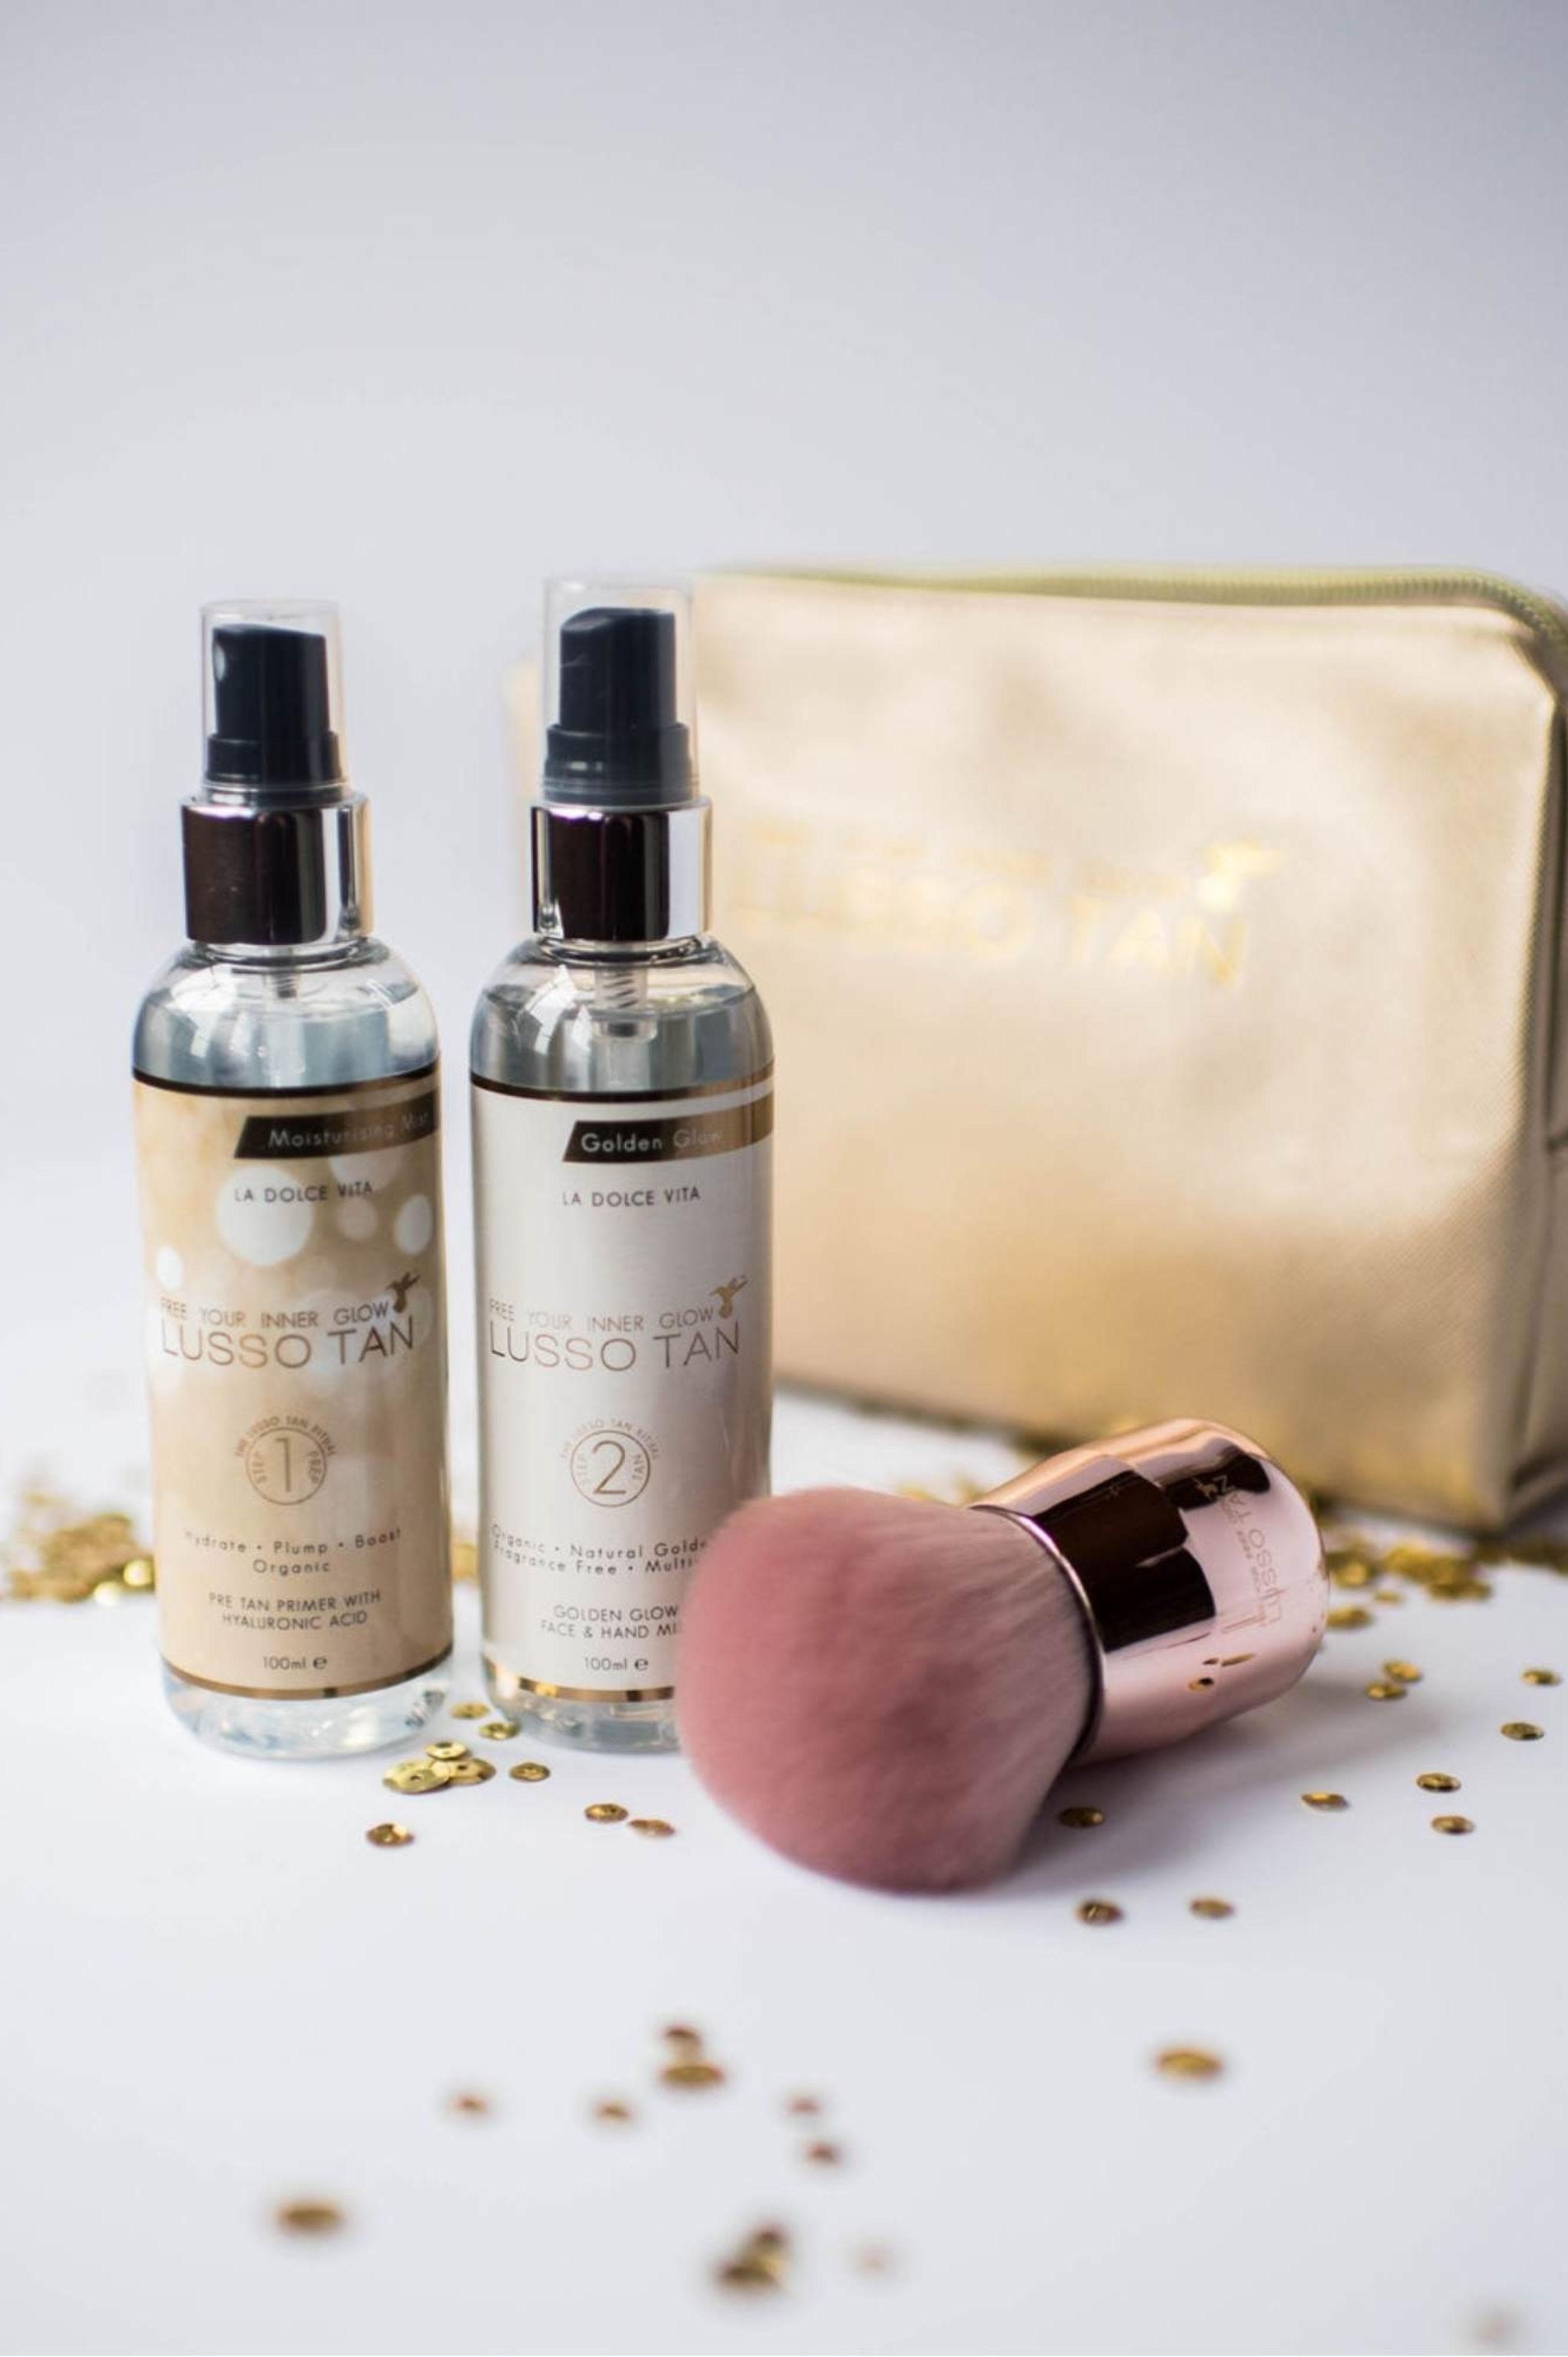 Lusso Tan Golden Glow Face Gift Set